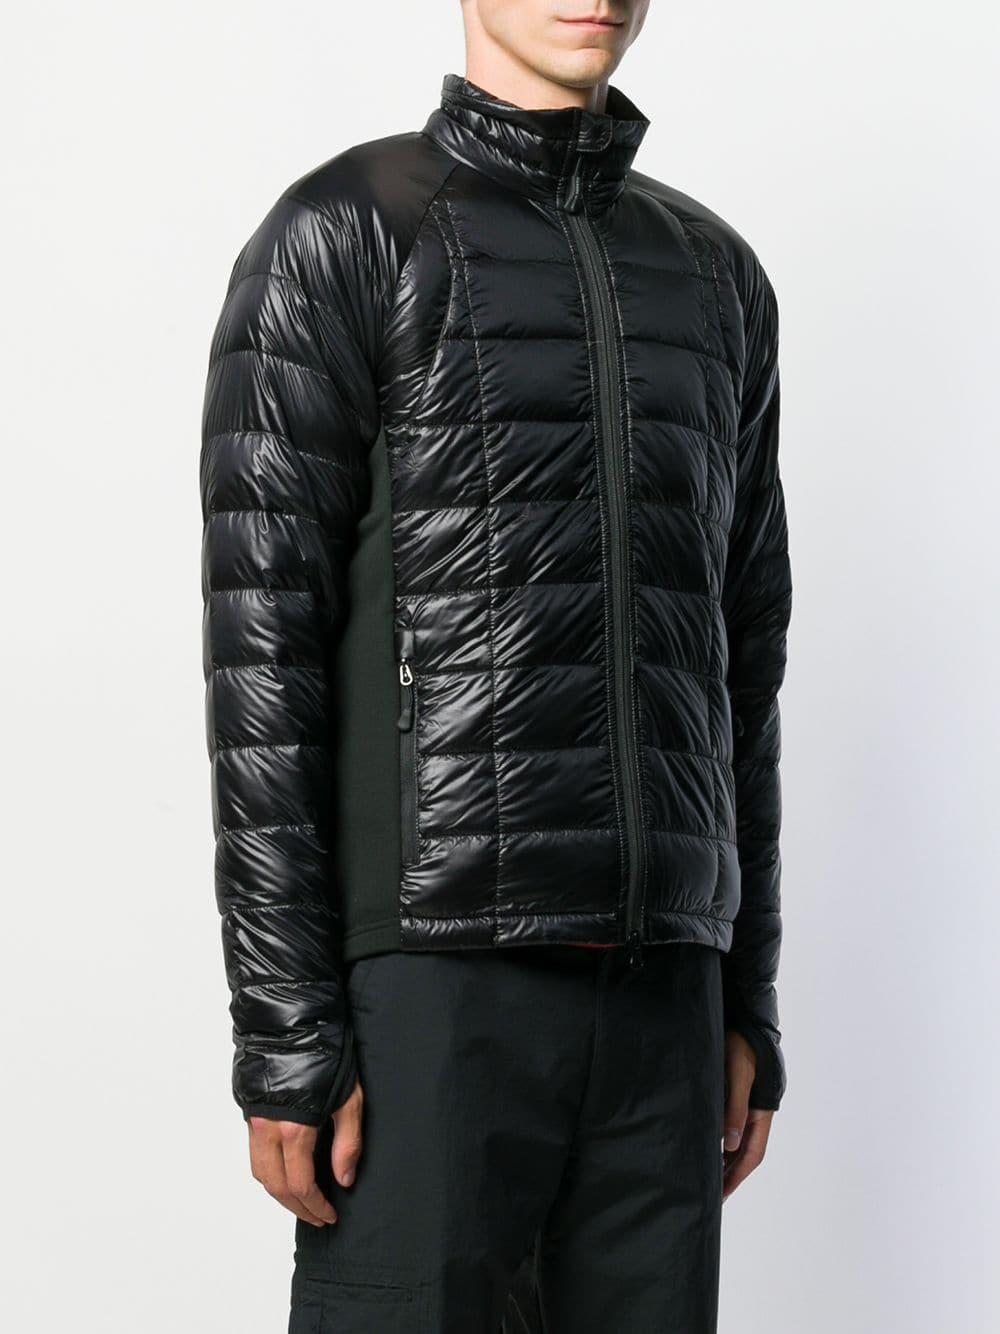 Canada Goose Goose Feather Down Jacket in Black for Men - Lyst